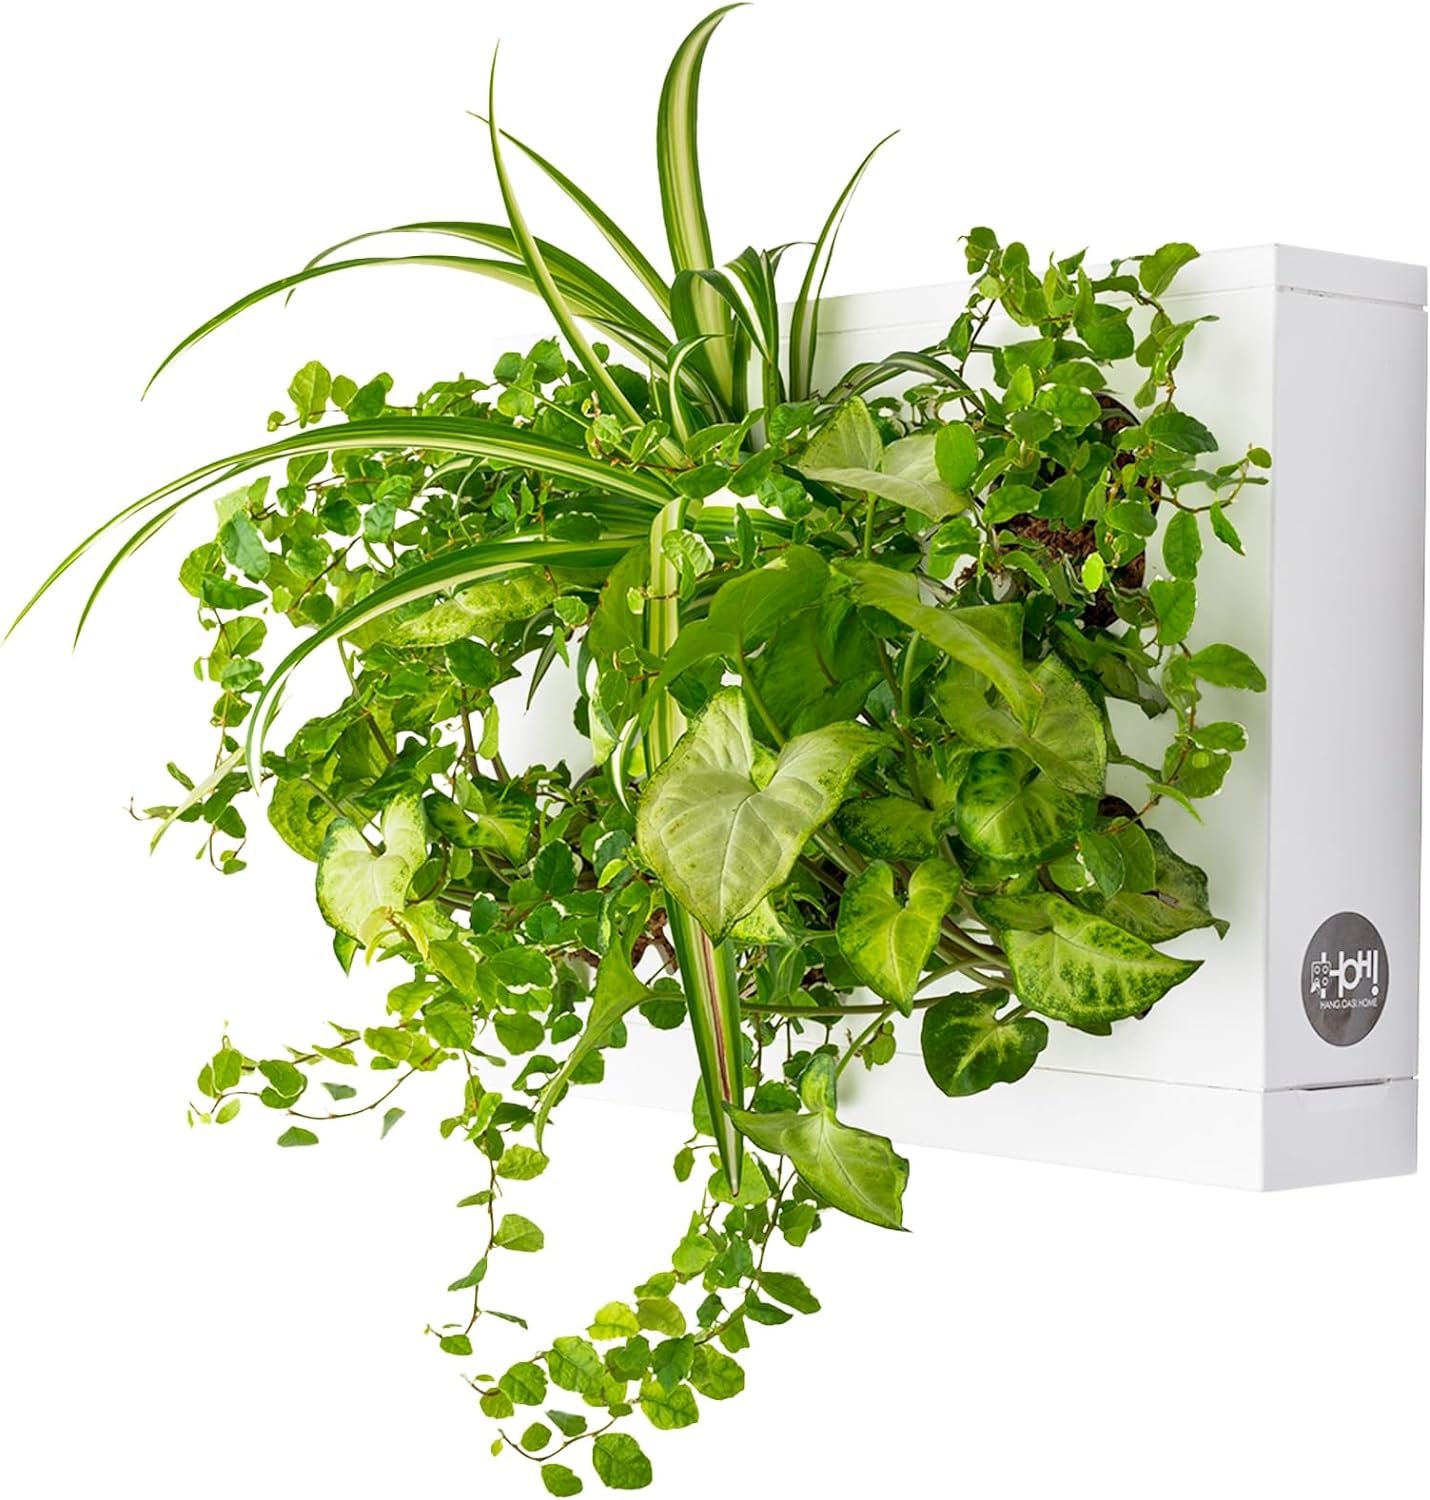 Ortis Green Hang.Oasi.Home - Indoor Vertical Garden, Contains 1 White Planter Unit, Design Your Own Living Wall With Vertical Gardening Planters, Use Indoors, Holds 6 Plants